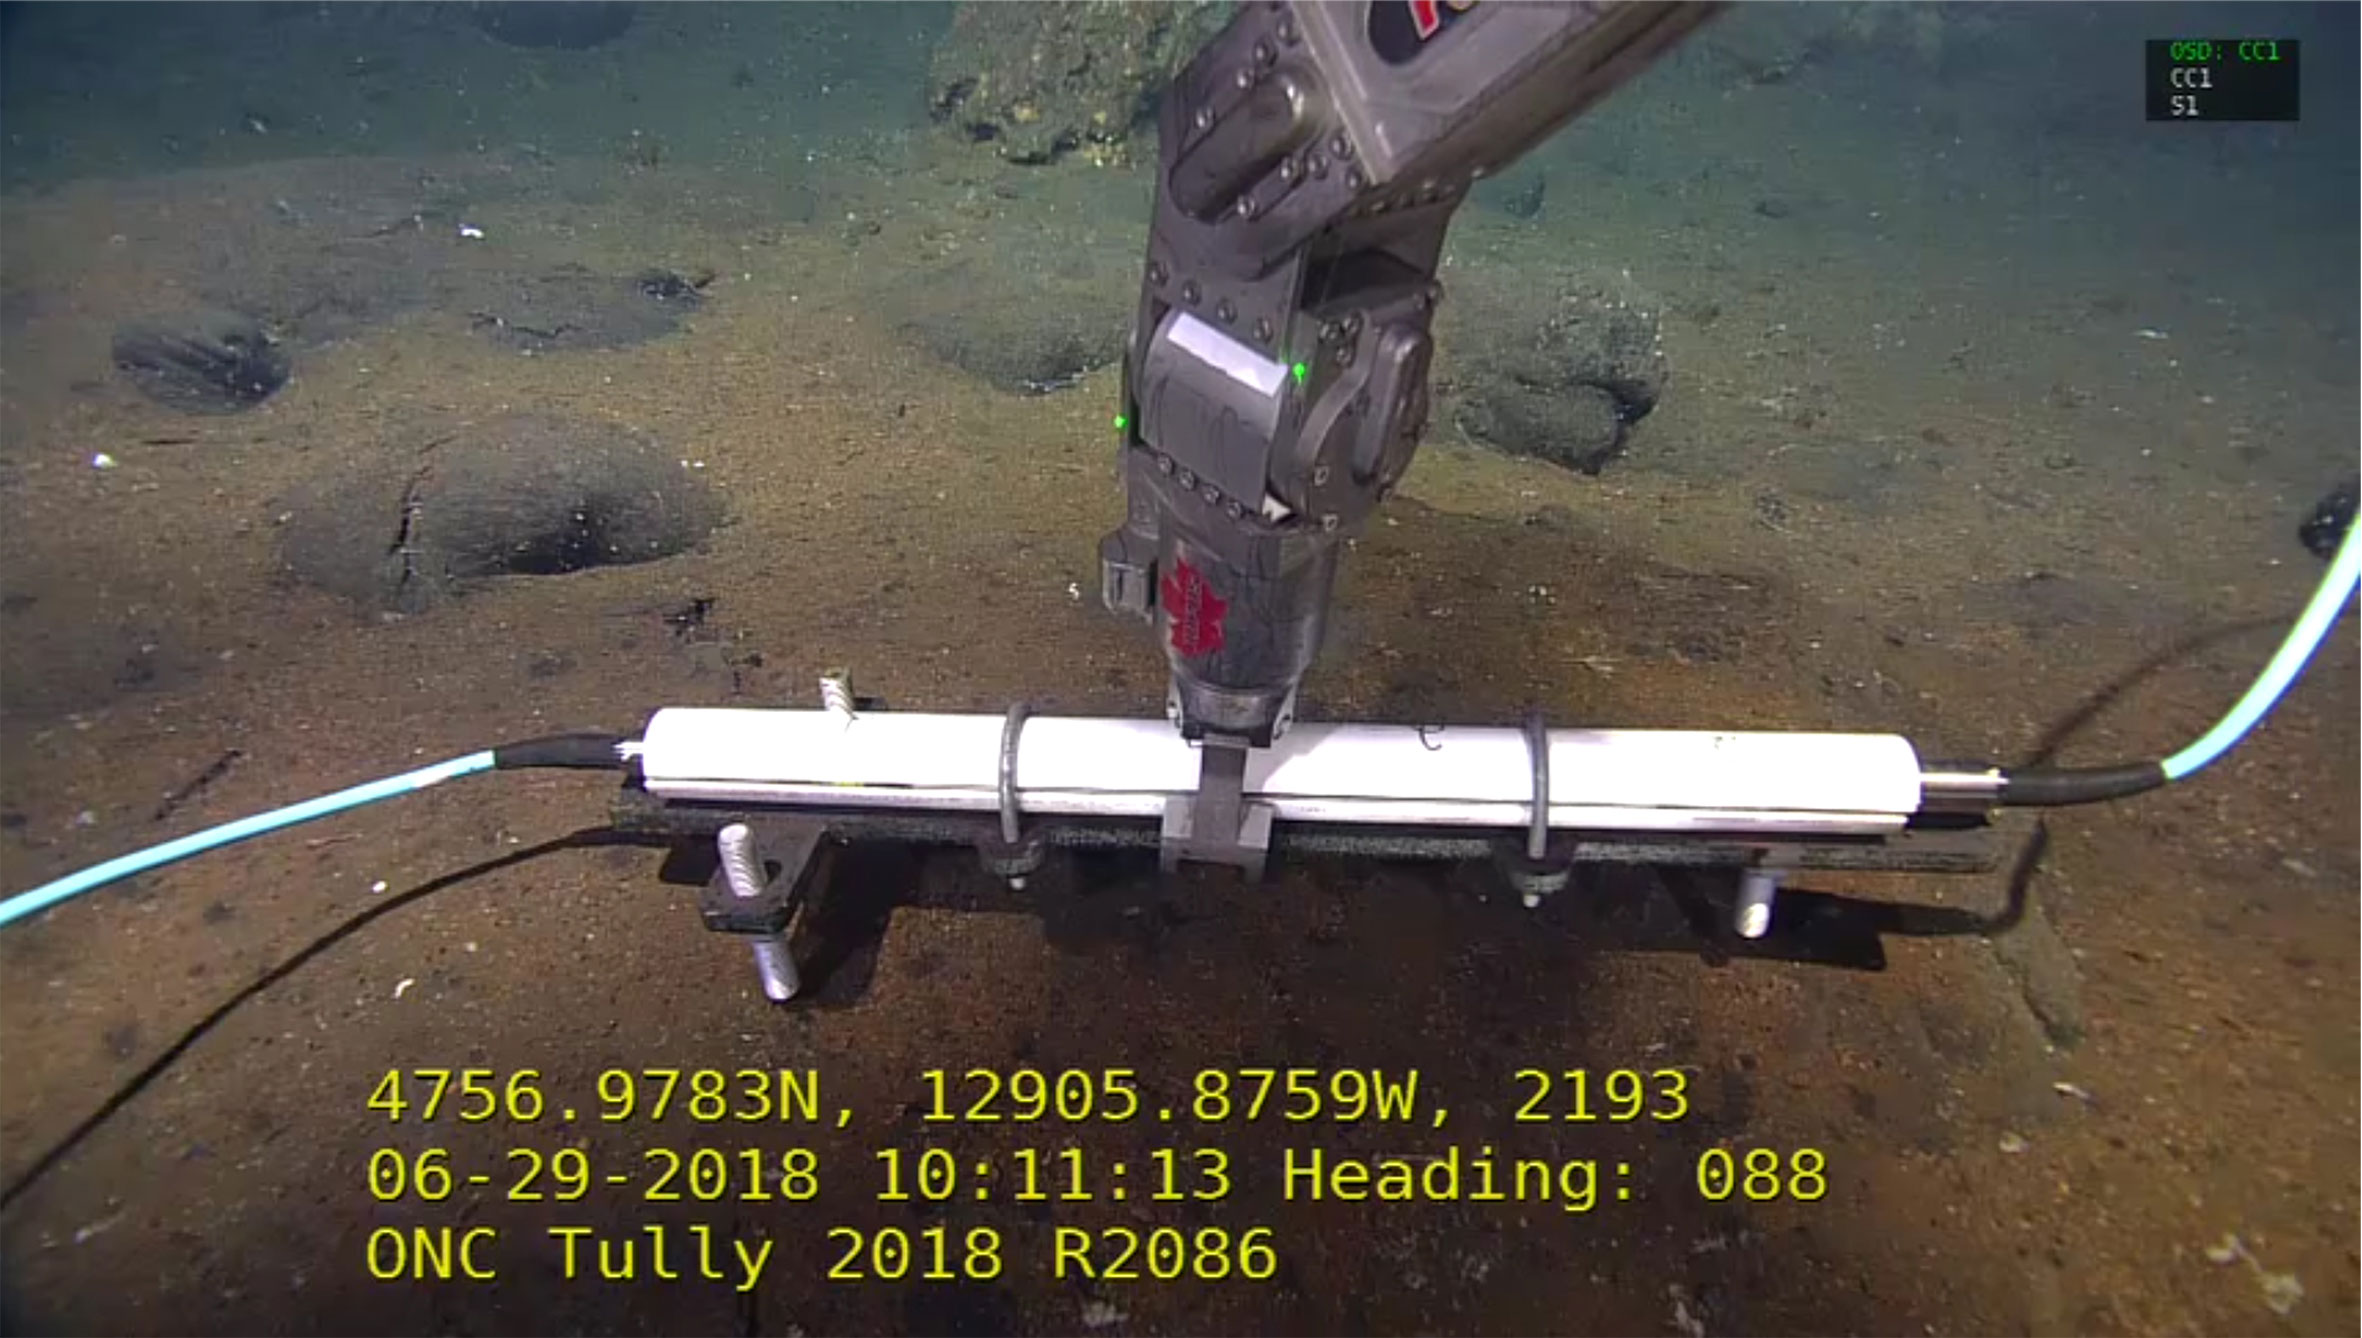 Güralp Maris Seismometer being placed in position at 2200m depth (Image courtesy of Ocean Networks Canada)